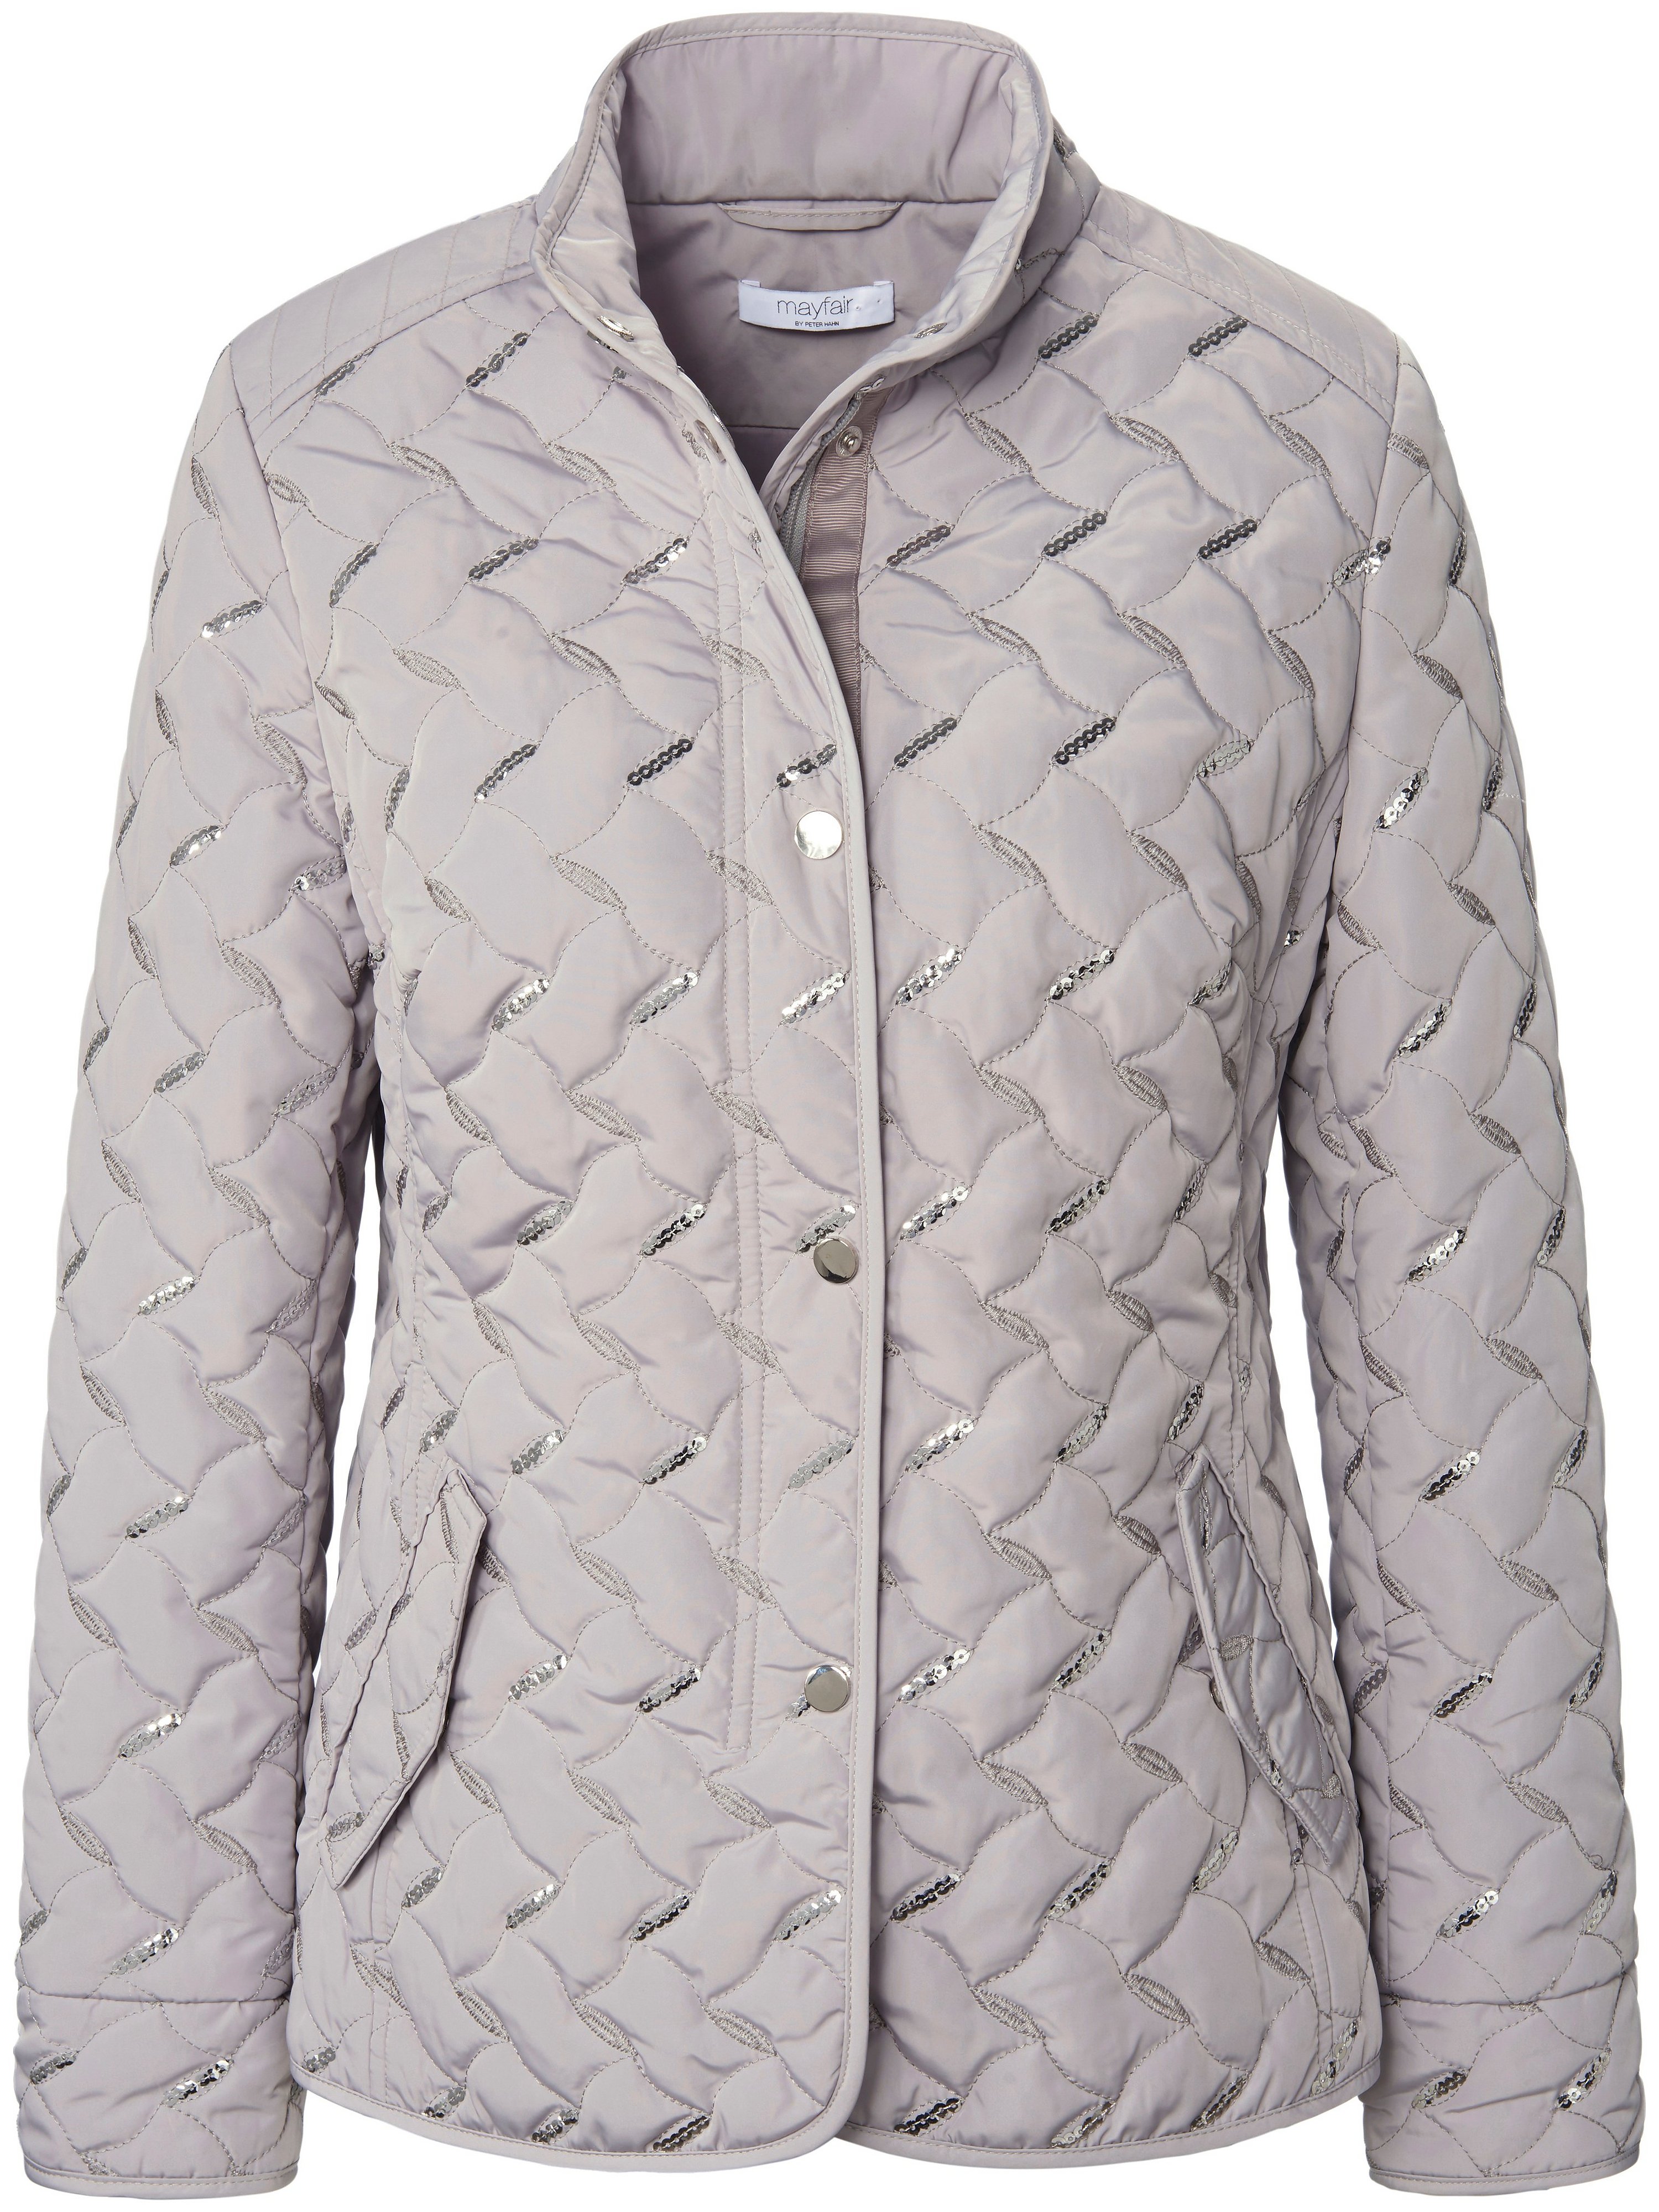 Quilted jacket stand-up collar mayfair by Peter Hahn grey